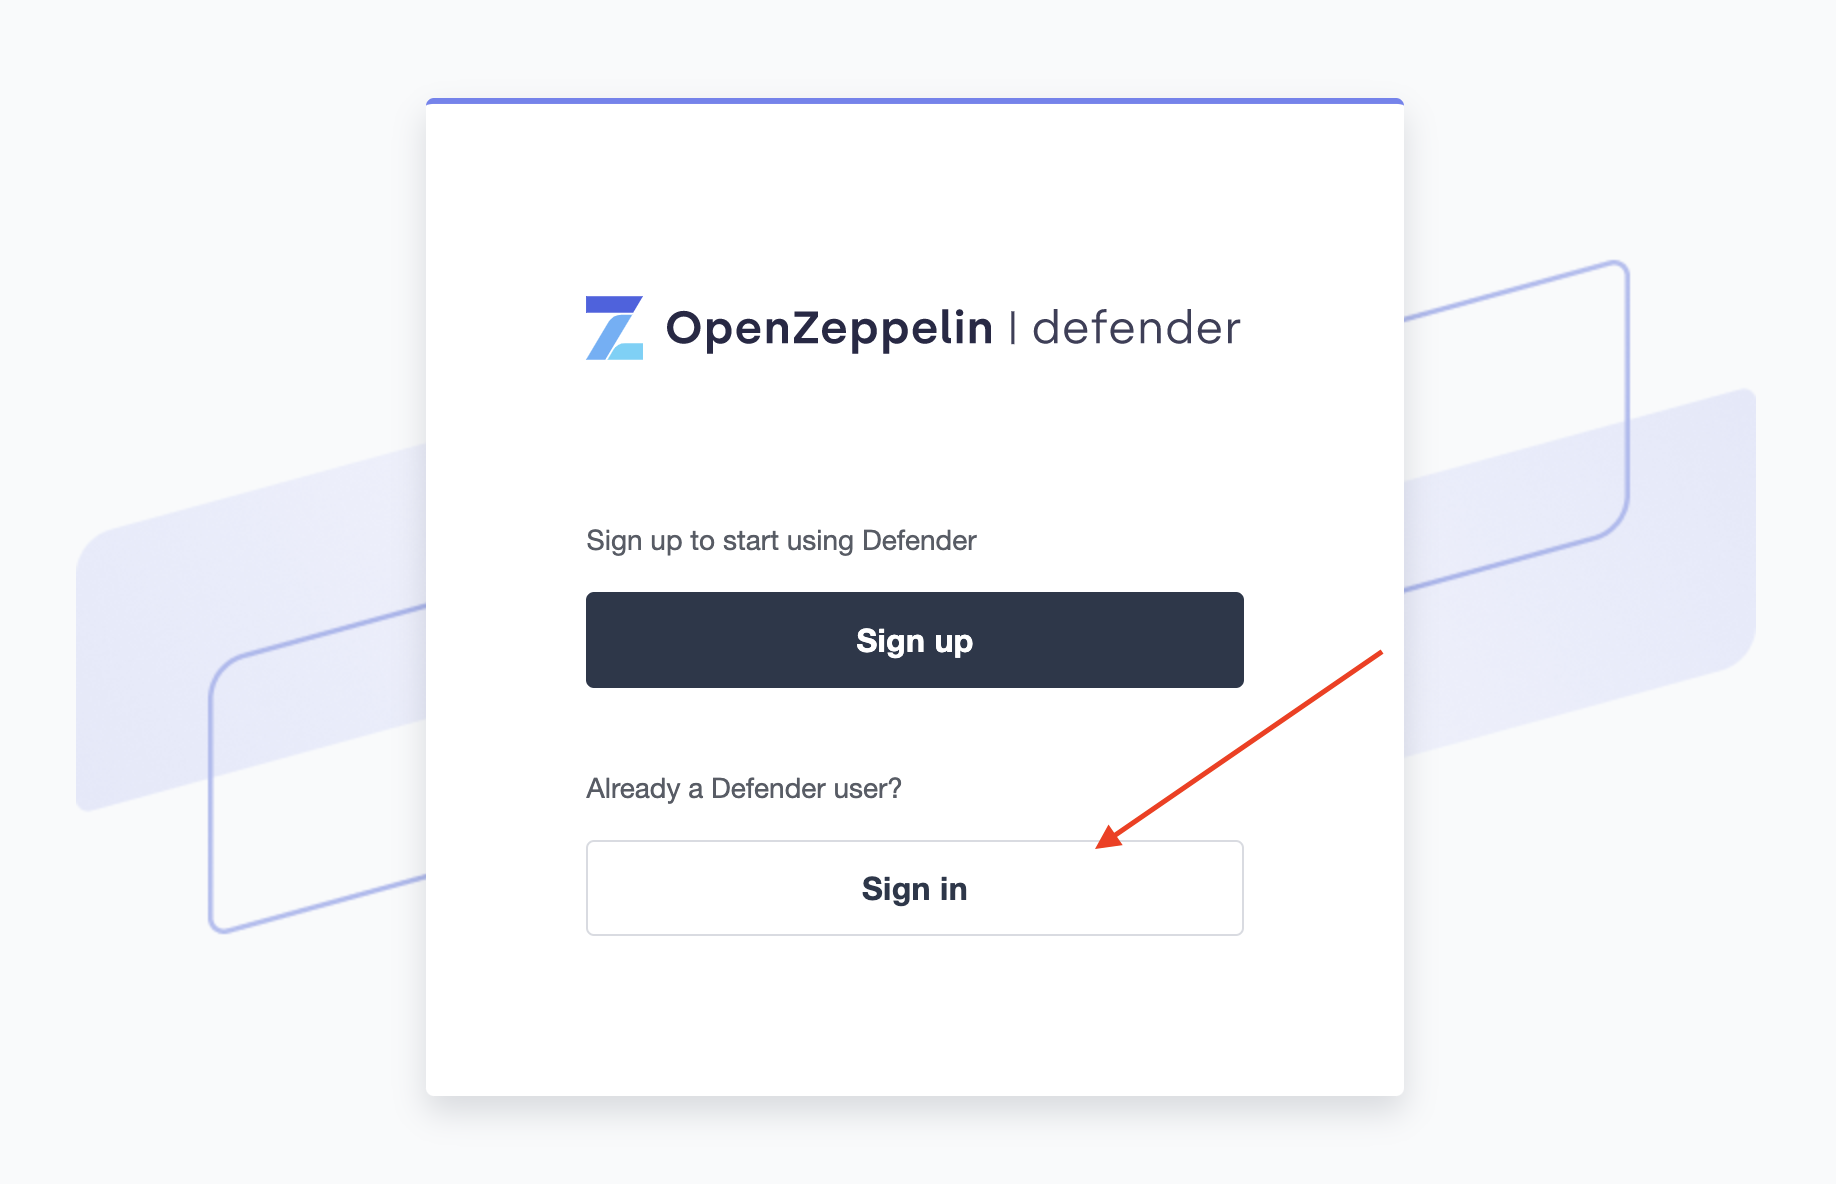 Go to Defender’s sign in page to trigger the password reset workflow